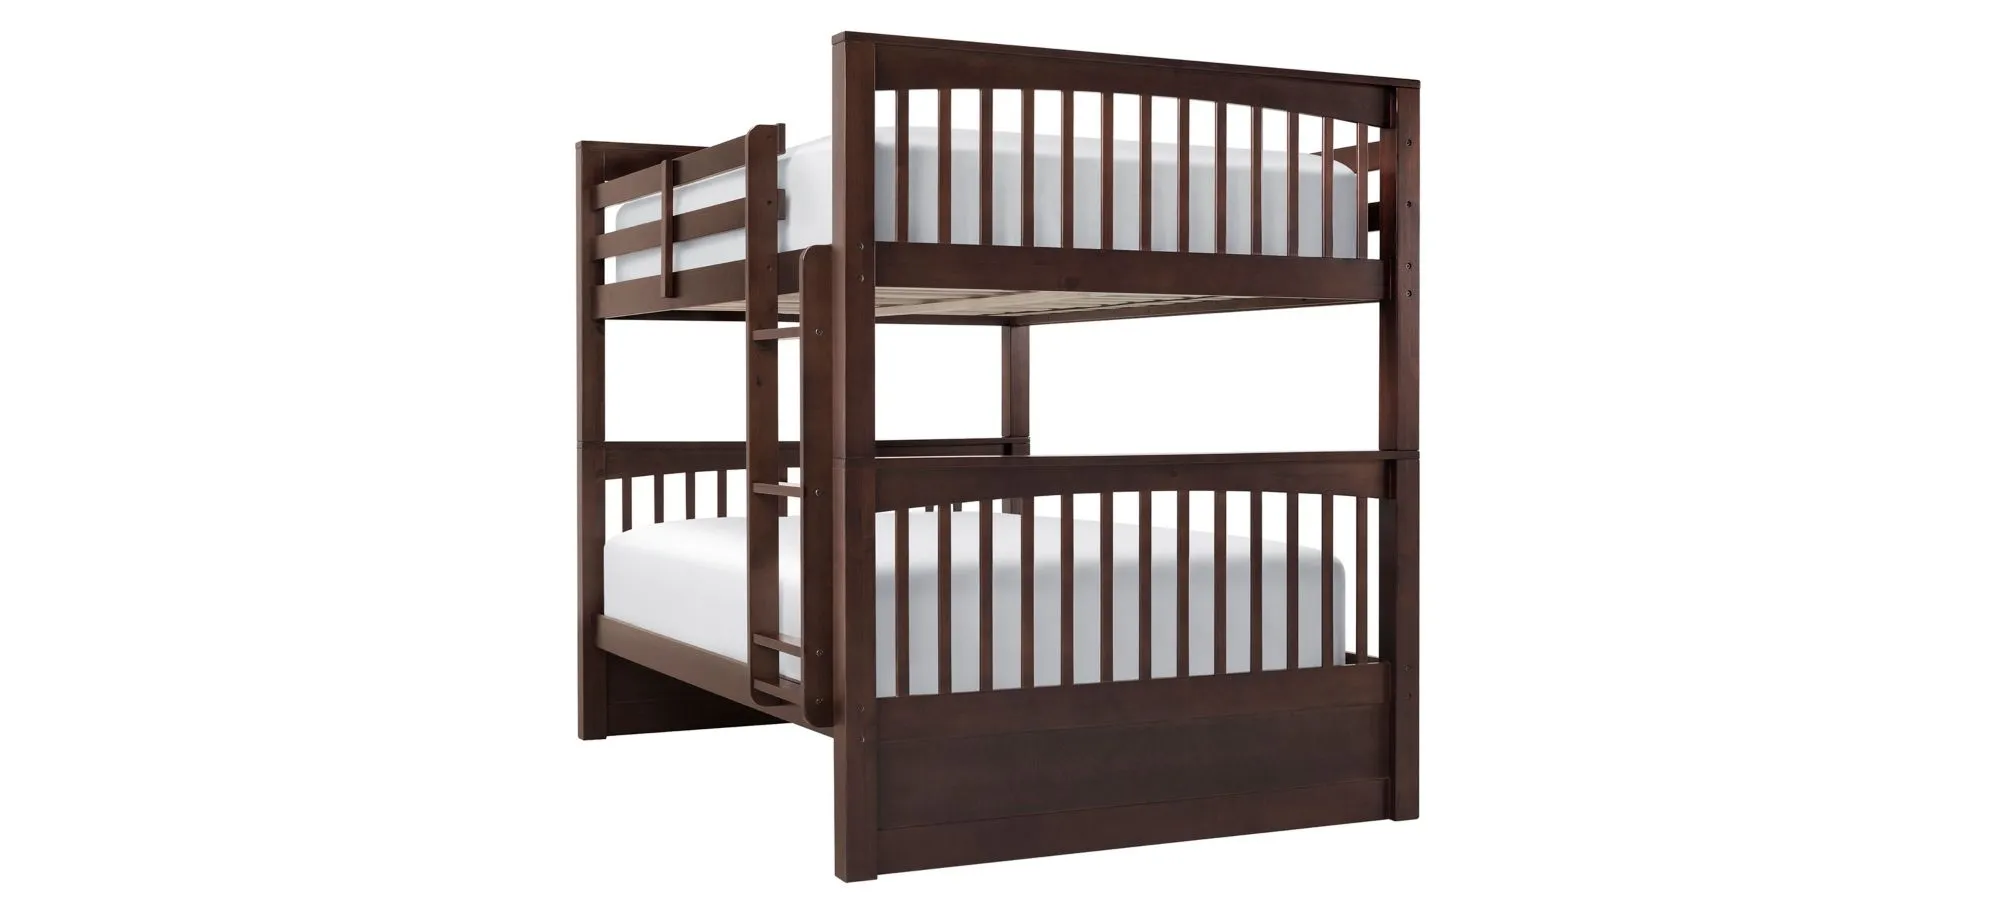 Jordan Full-Over-Full Bunk Bed in Chocolate by Hillsdale Furniture